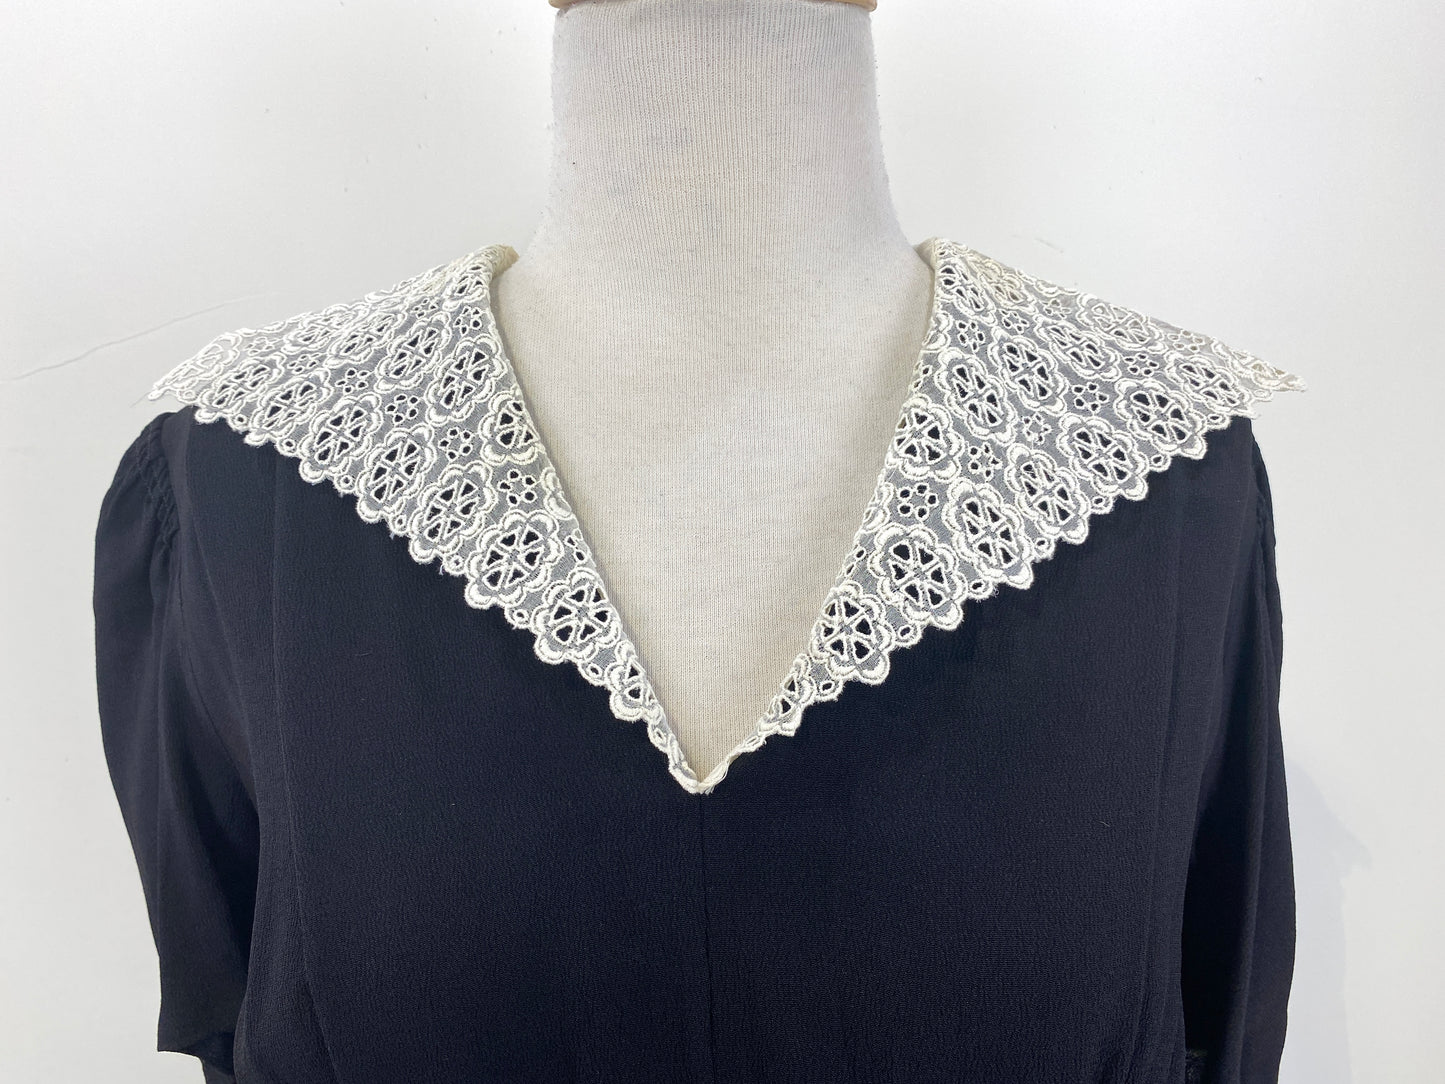 Vintage 1930s White Cotton Embroidered Collar